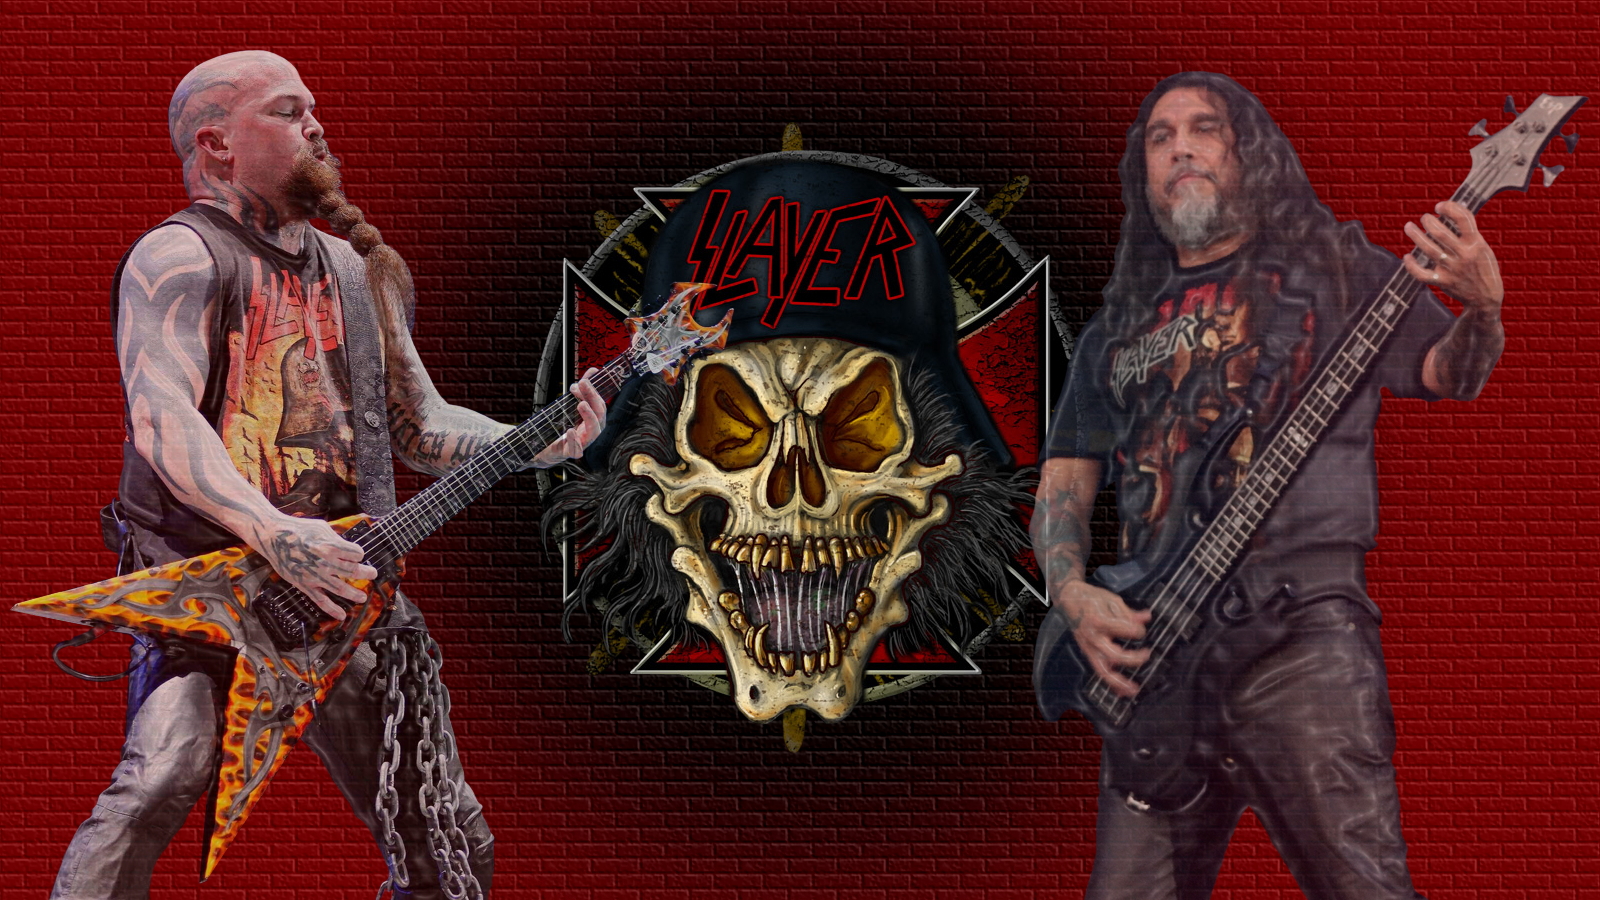 Slayer Wallpapers and Backgrounds Image.